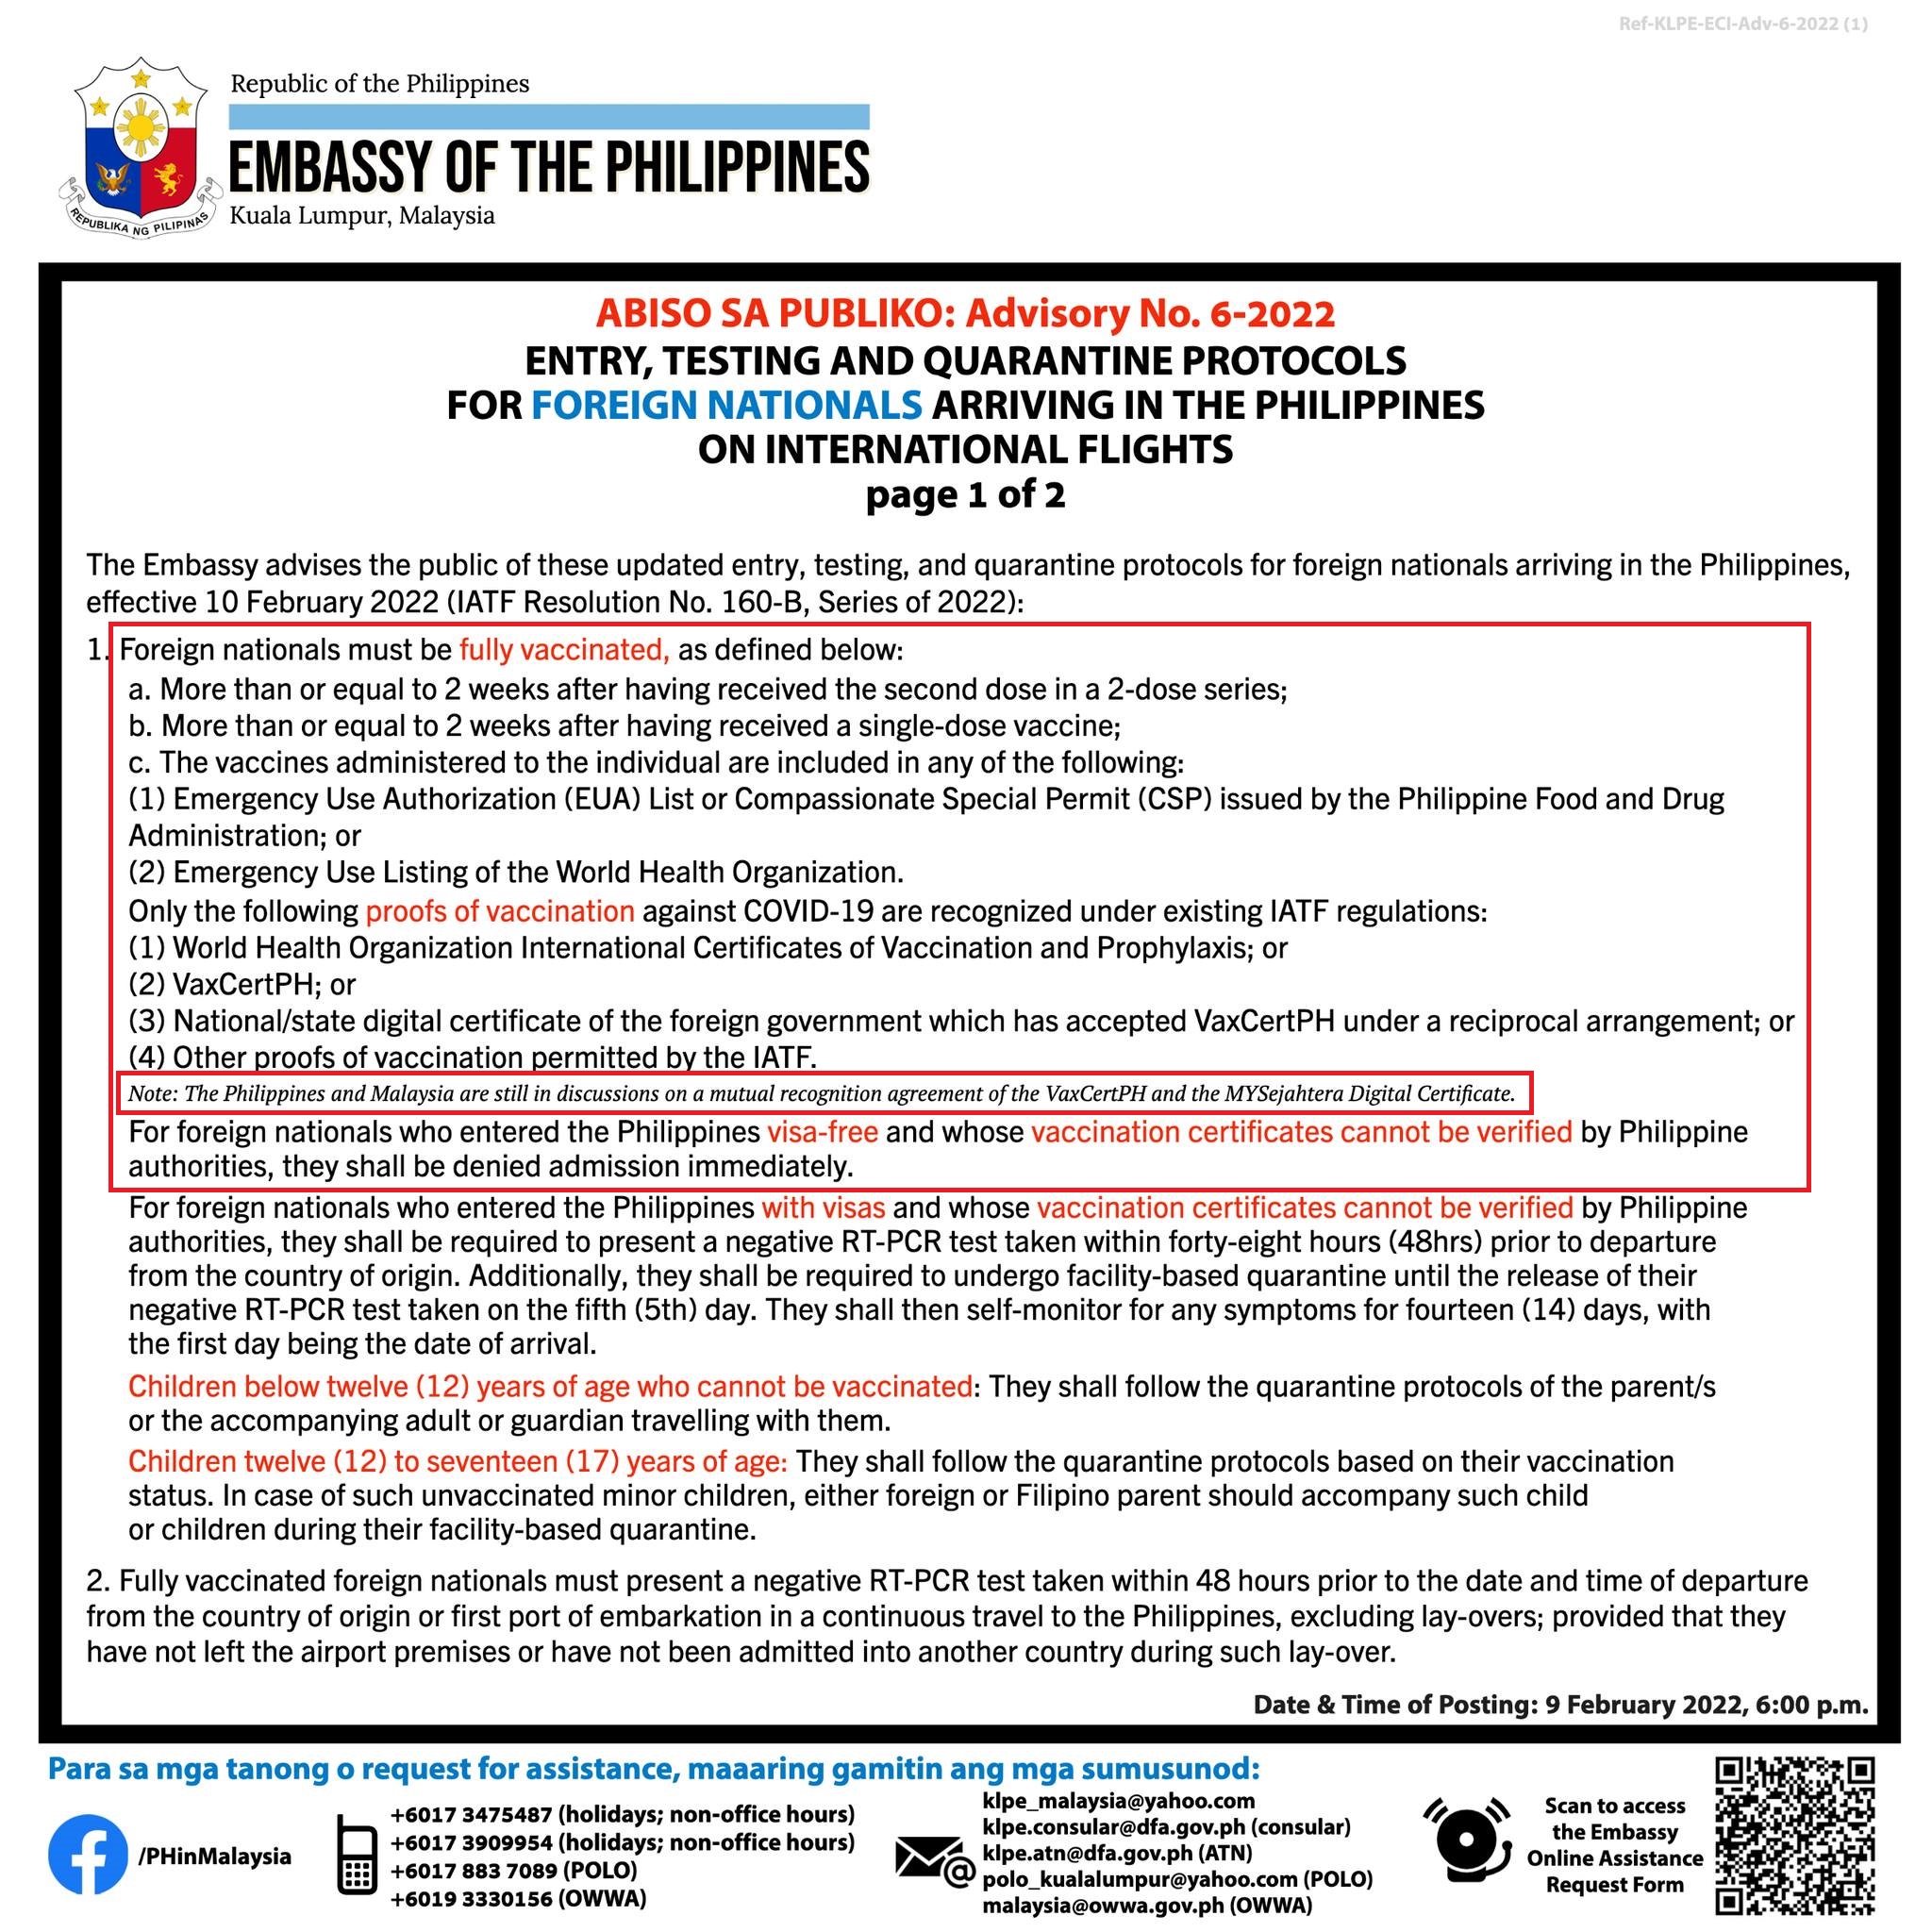 An earlier travel advisory issued by the Philippines states that both countries were in the process of coming to mutual vaccine recognition.